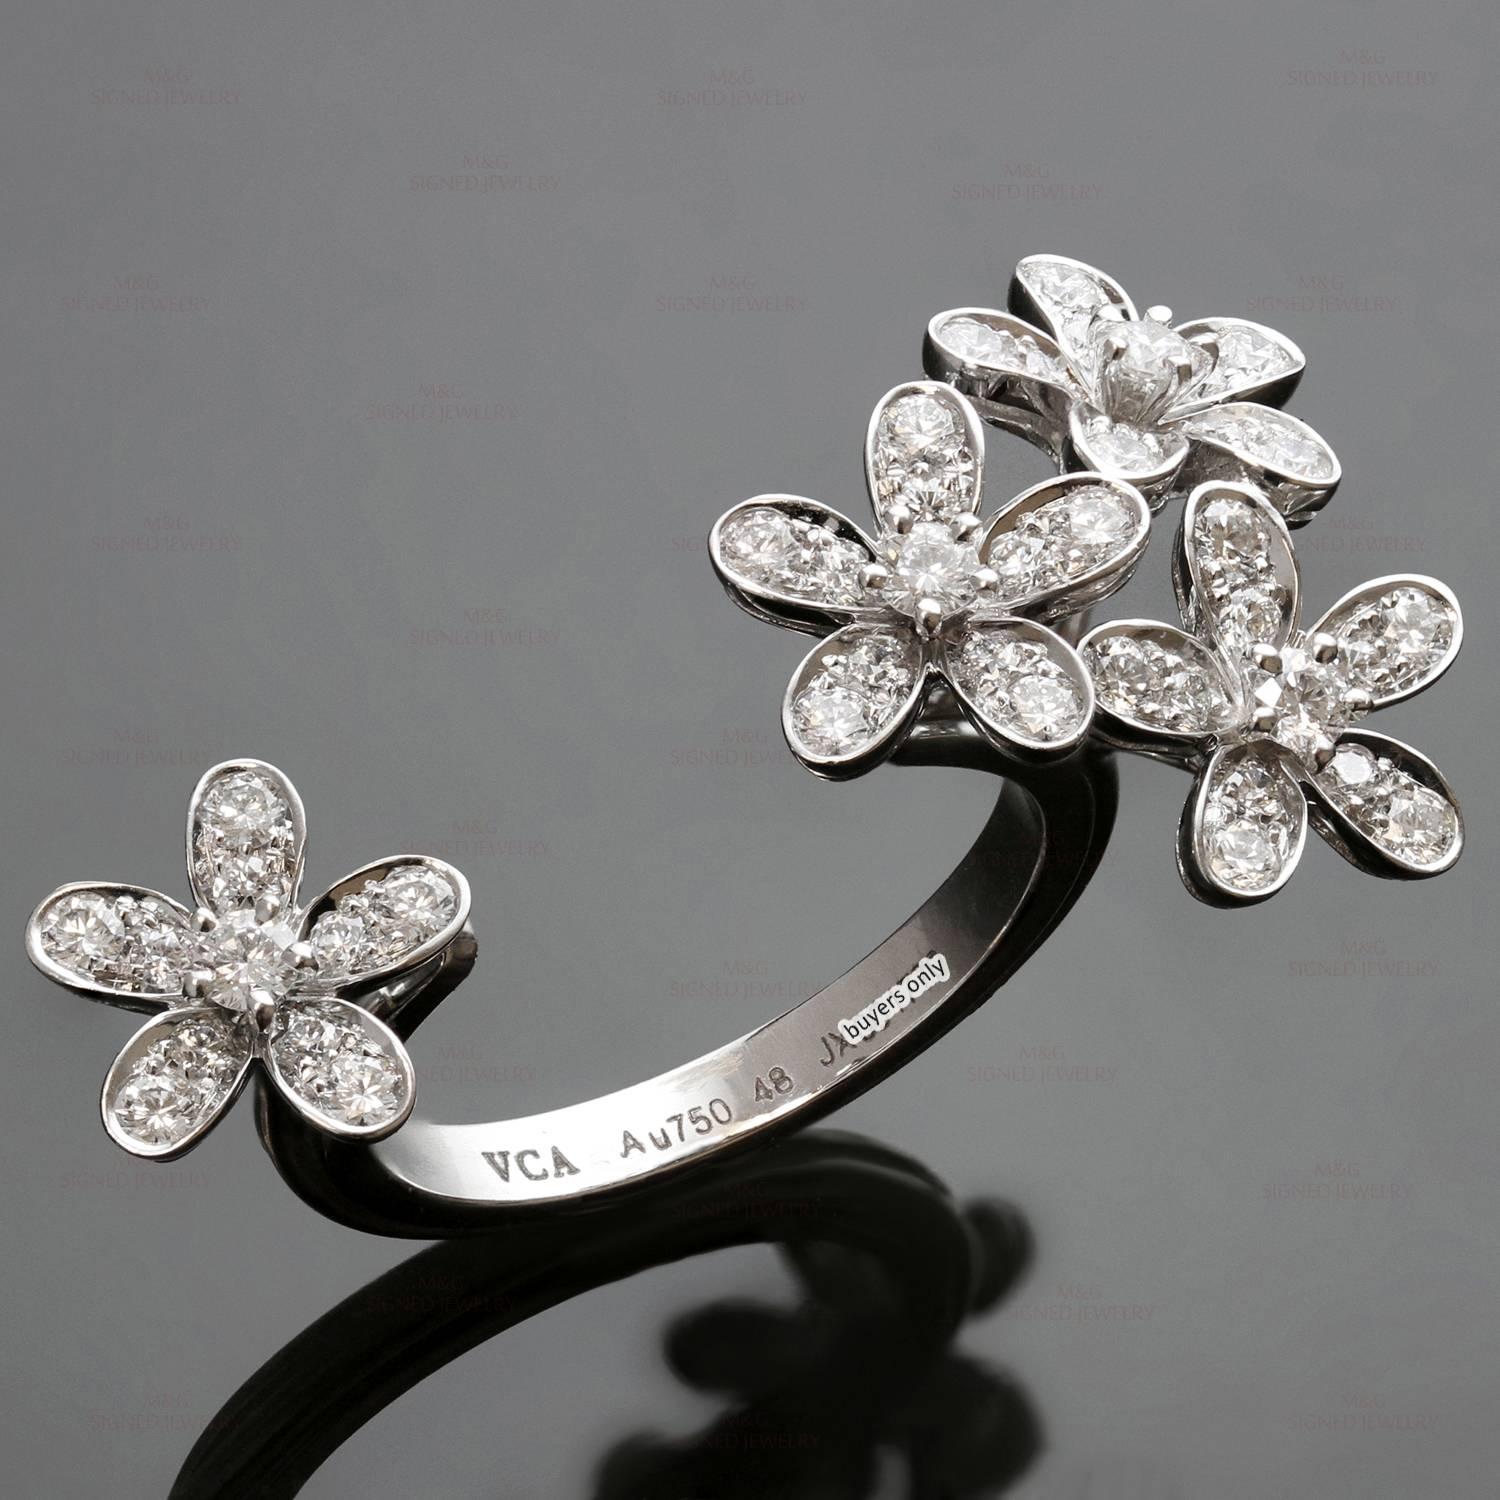 This iconic Between the Finger ring from Van Cleef & Arpel's Socrate collection is made in 18k white gold and features sparkling delicate flowers set with brilliant-cut round diamonds of an estimated 0.70 carats and fitting perfectly between two